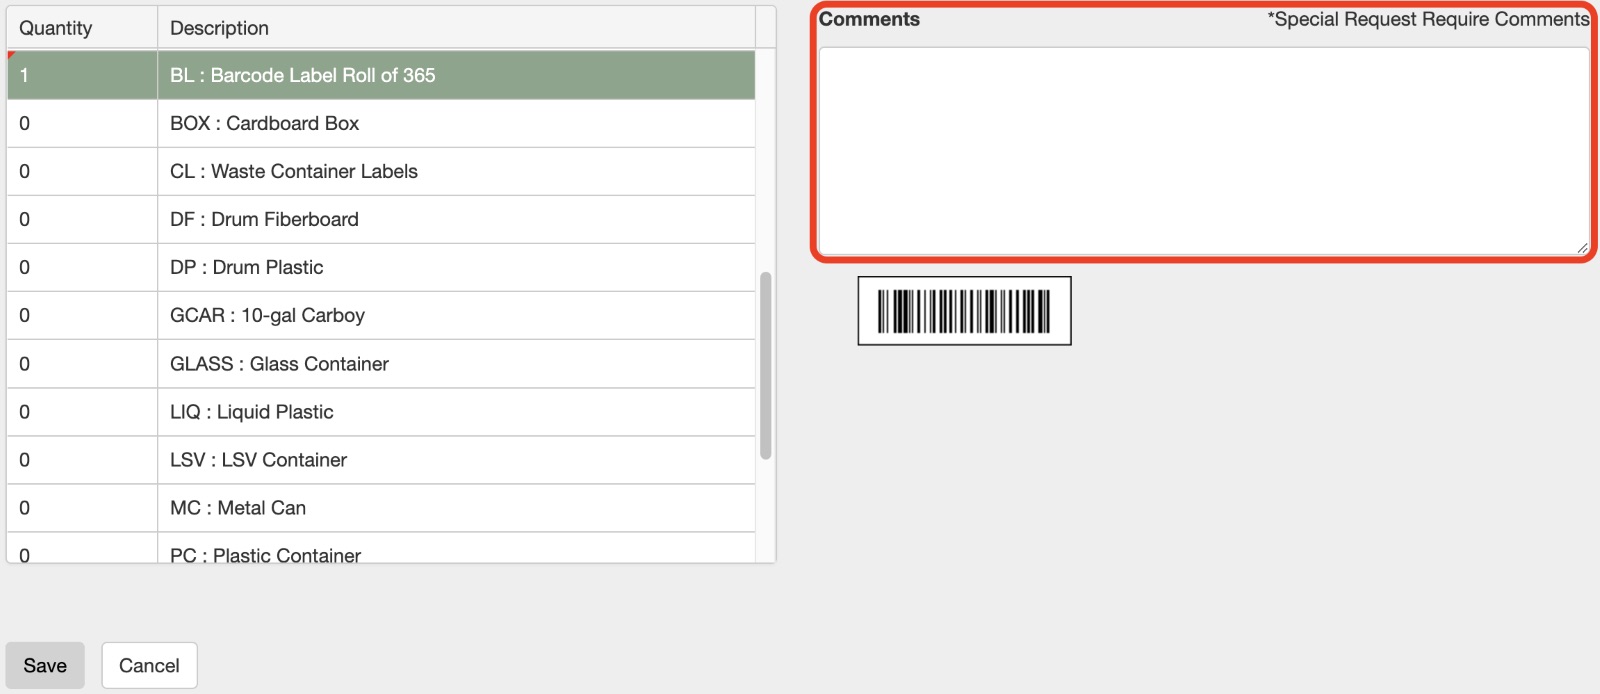 Leave any special requests by entering those in the "Comments" box to the right